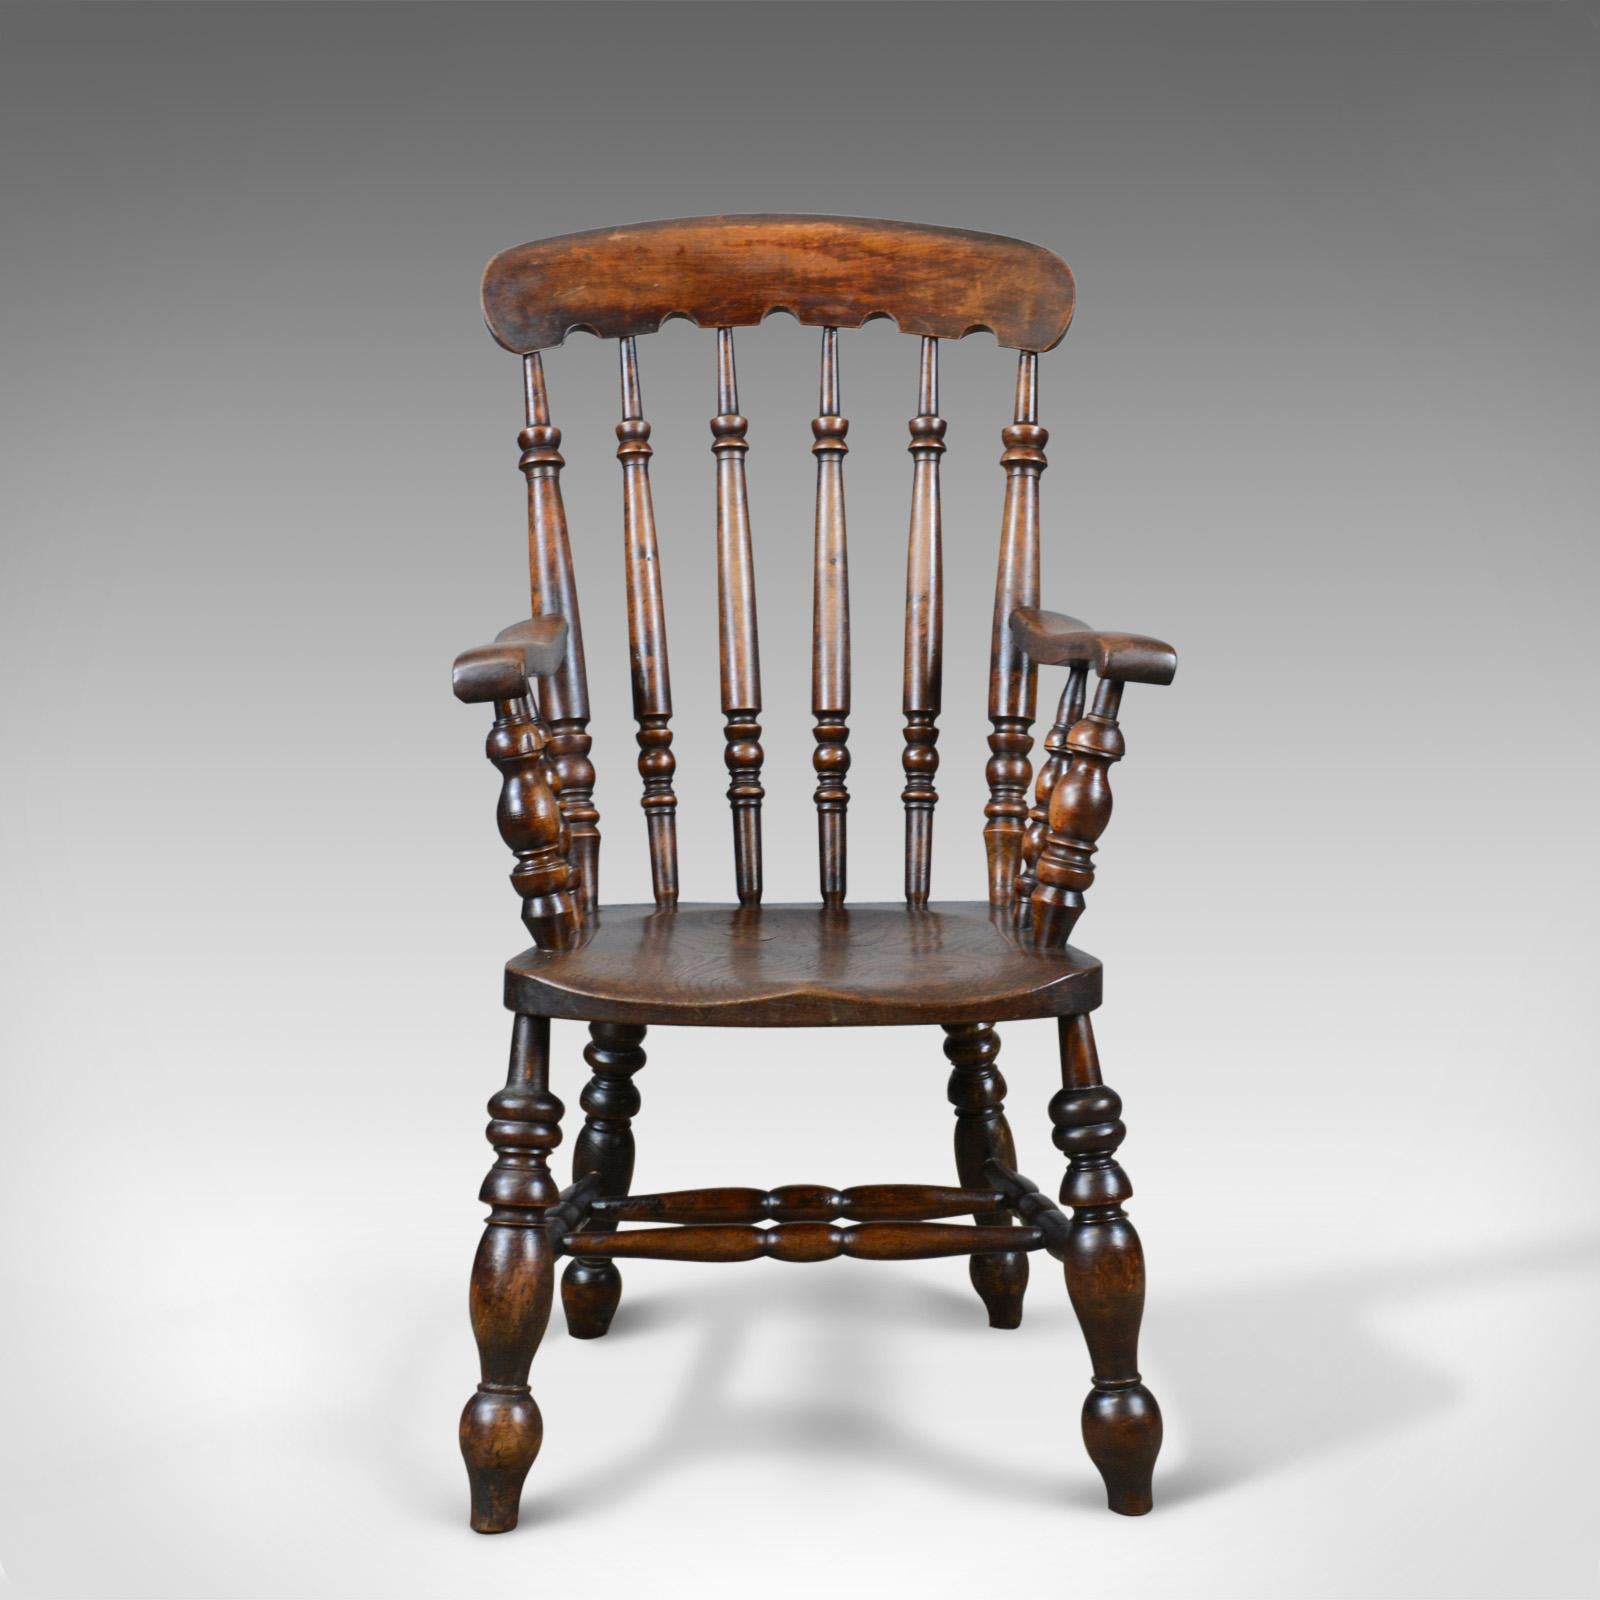 This is an antique elbow chair, an English, Victorian stick-back Windsor chair in elm dating to the late 19th century, circa 1880.

Appealing color and a desirable aged patina
Grain interest to the thick elm, saddle seat slab
Attractive, notched